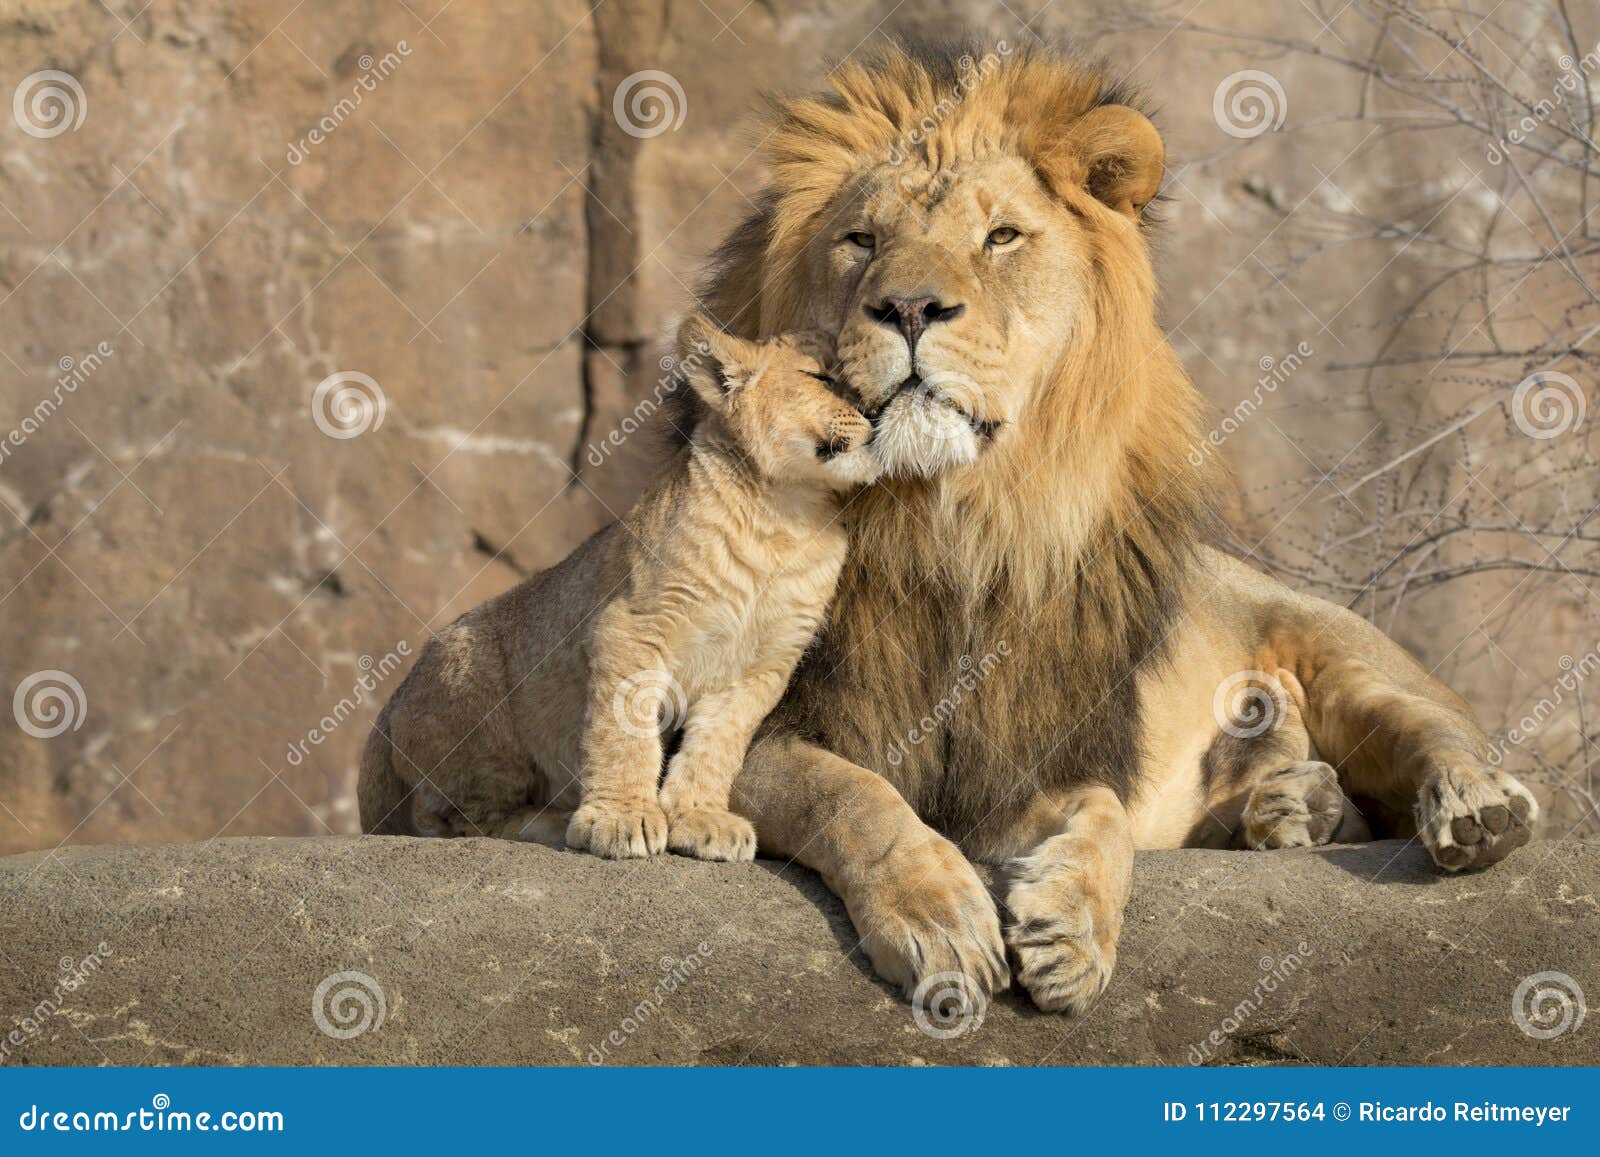 male african lion is cuddled by his cub during an affectionate moment